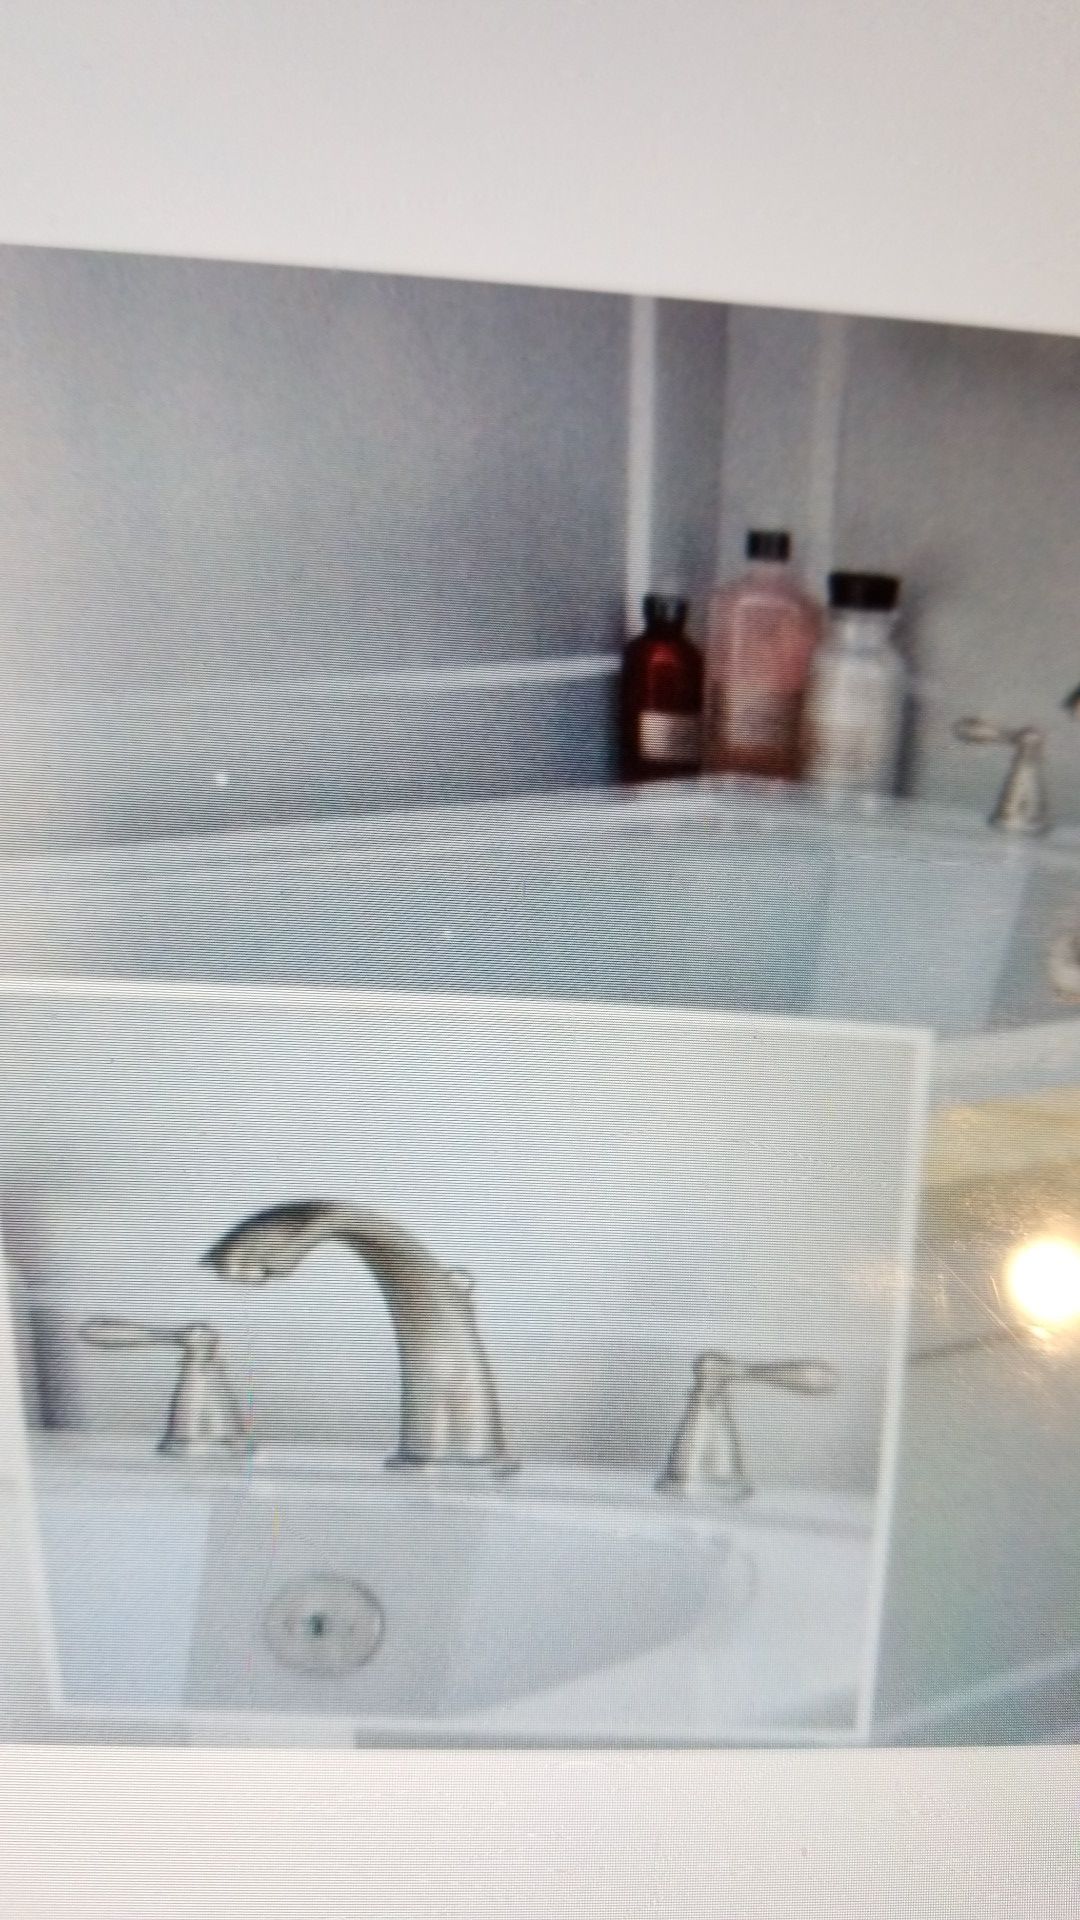 faucet for tub $130